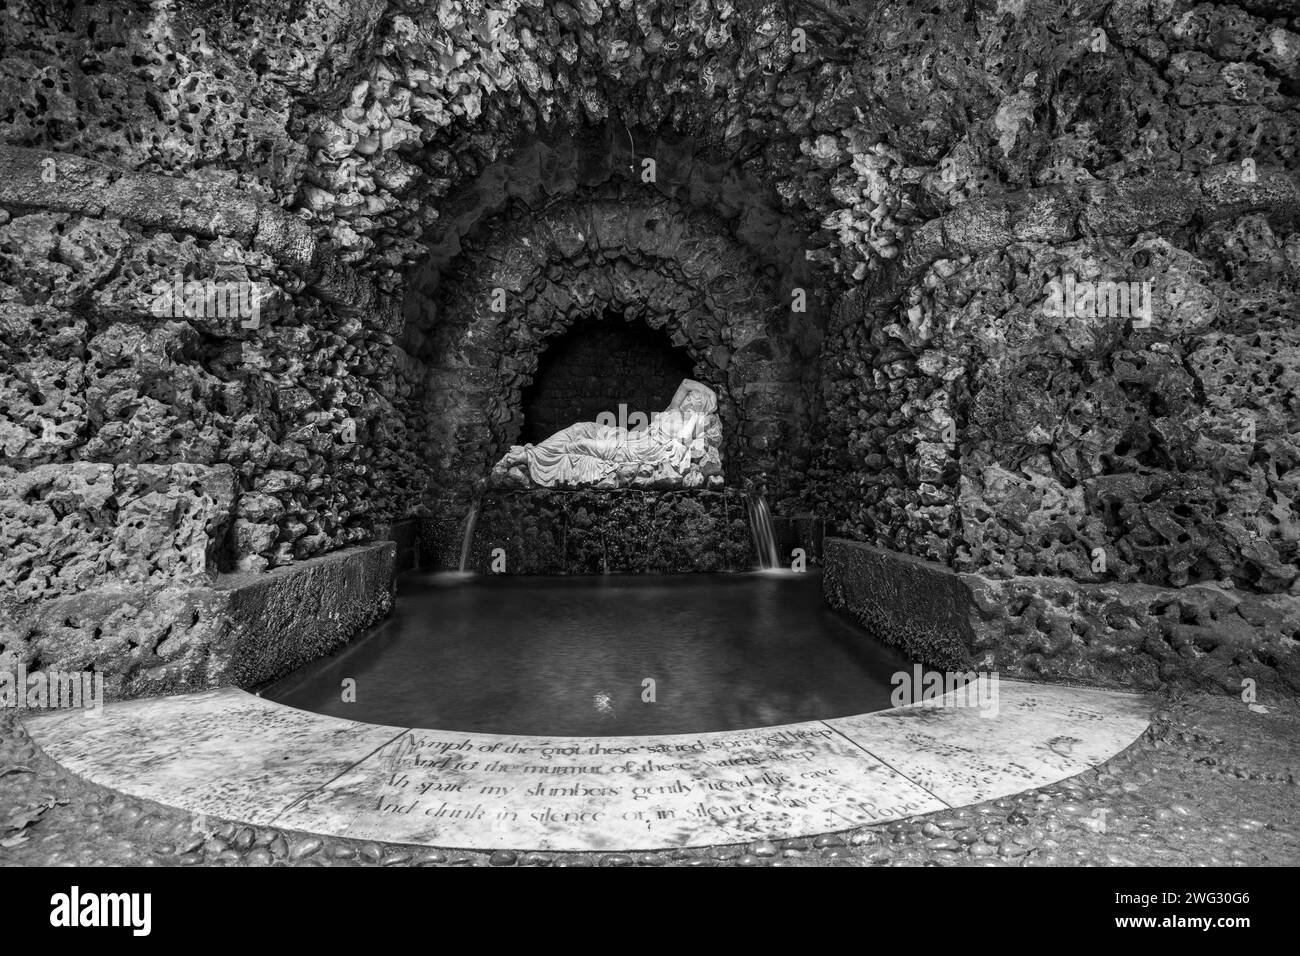 Stourton.Wiltshire.United Kingdom.October 20th 2020.The sleeping nymph statue inside the grotto at Stourhead Gardens in Wiltshire Stock Photo